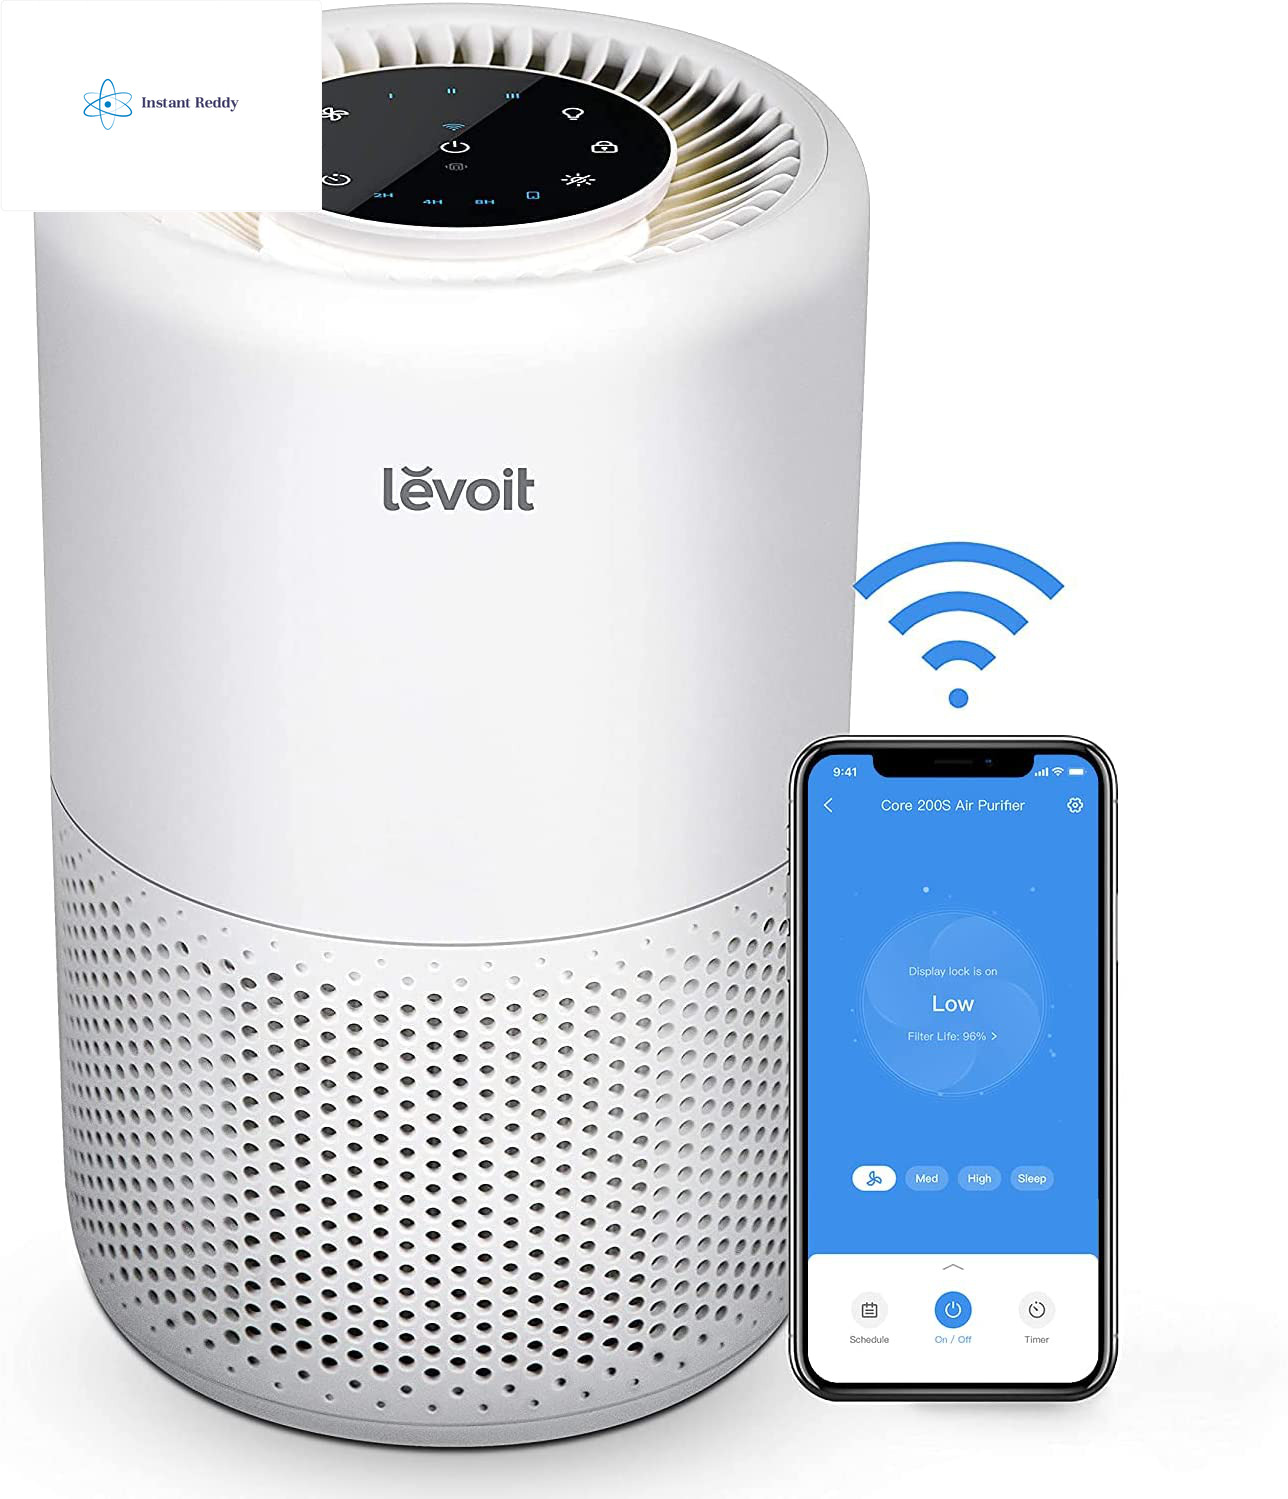 LEVOIT Air Purifiers for Home, Smart WiFi Alexa Control, H13 True HEPA Filter fo